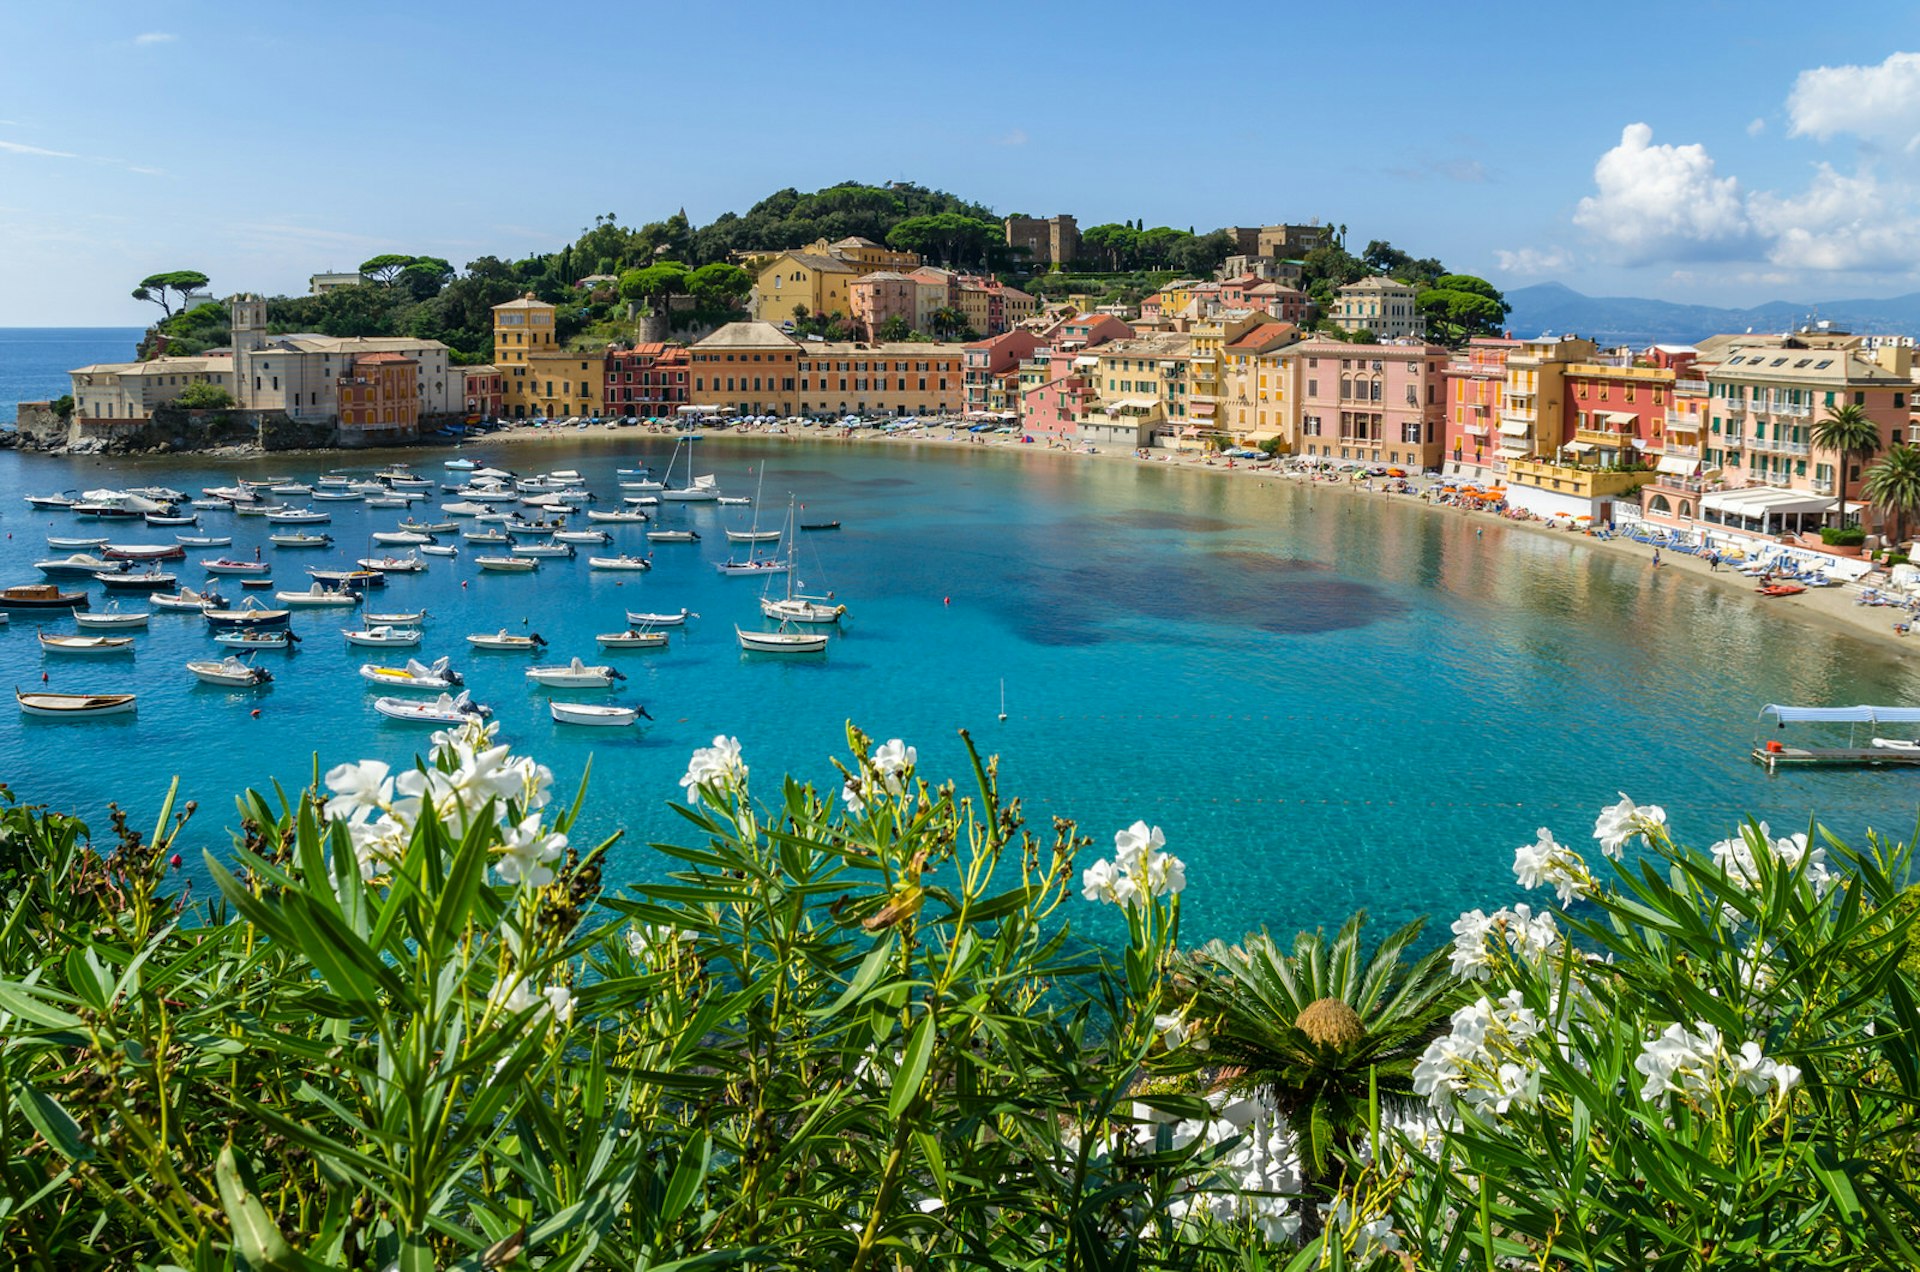 A view over Sestri Levante's Baia del Silenzio, with flowering bushes in the foreground and about 30 small white boats on the turquoise water. The bay is almost a perfect semi-circle, behind the thin strip of white sand there are buildings painted in warm colours and vibrantly green trees. 